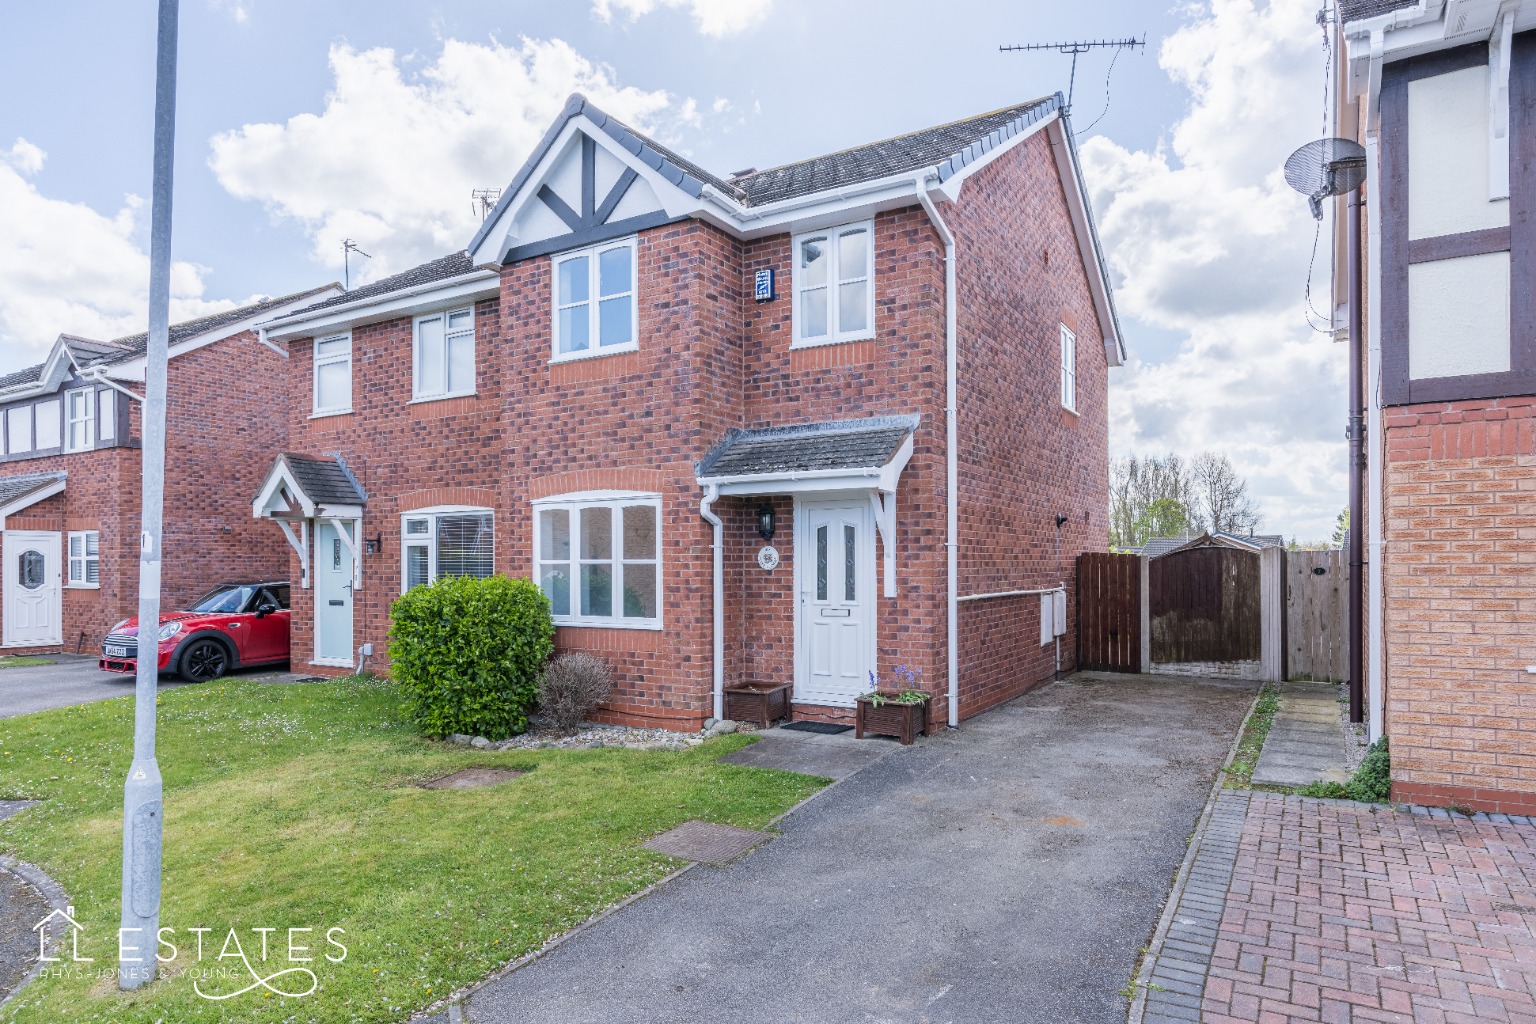 3 bed semi-detached house for sale in Llys Elinor, Rhyl - Property Image 1